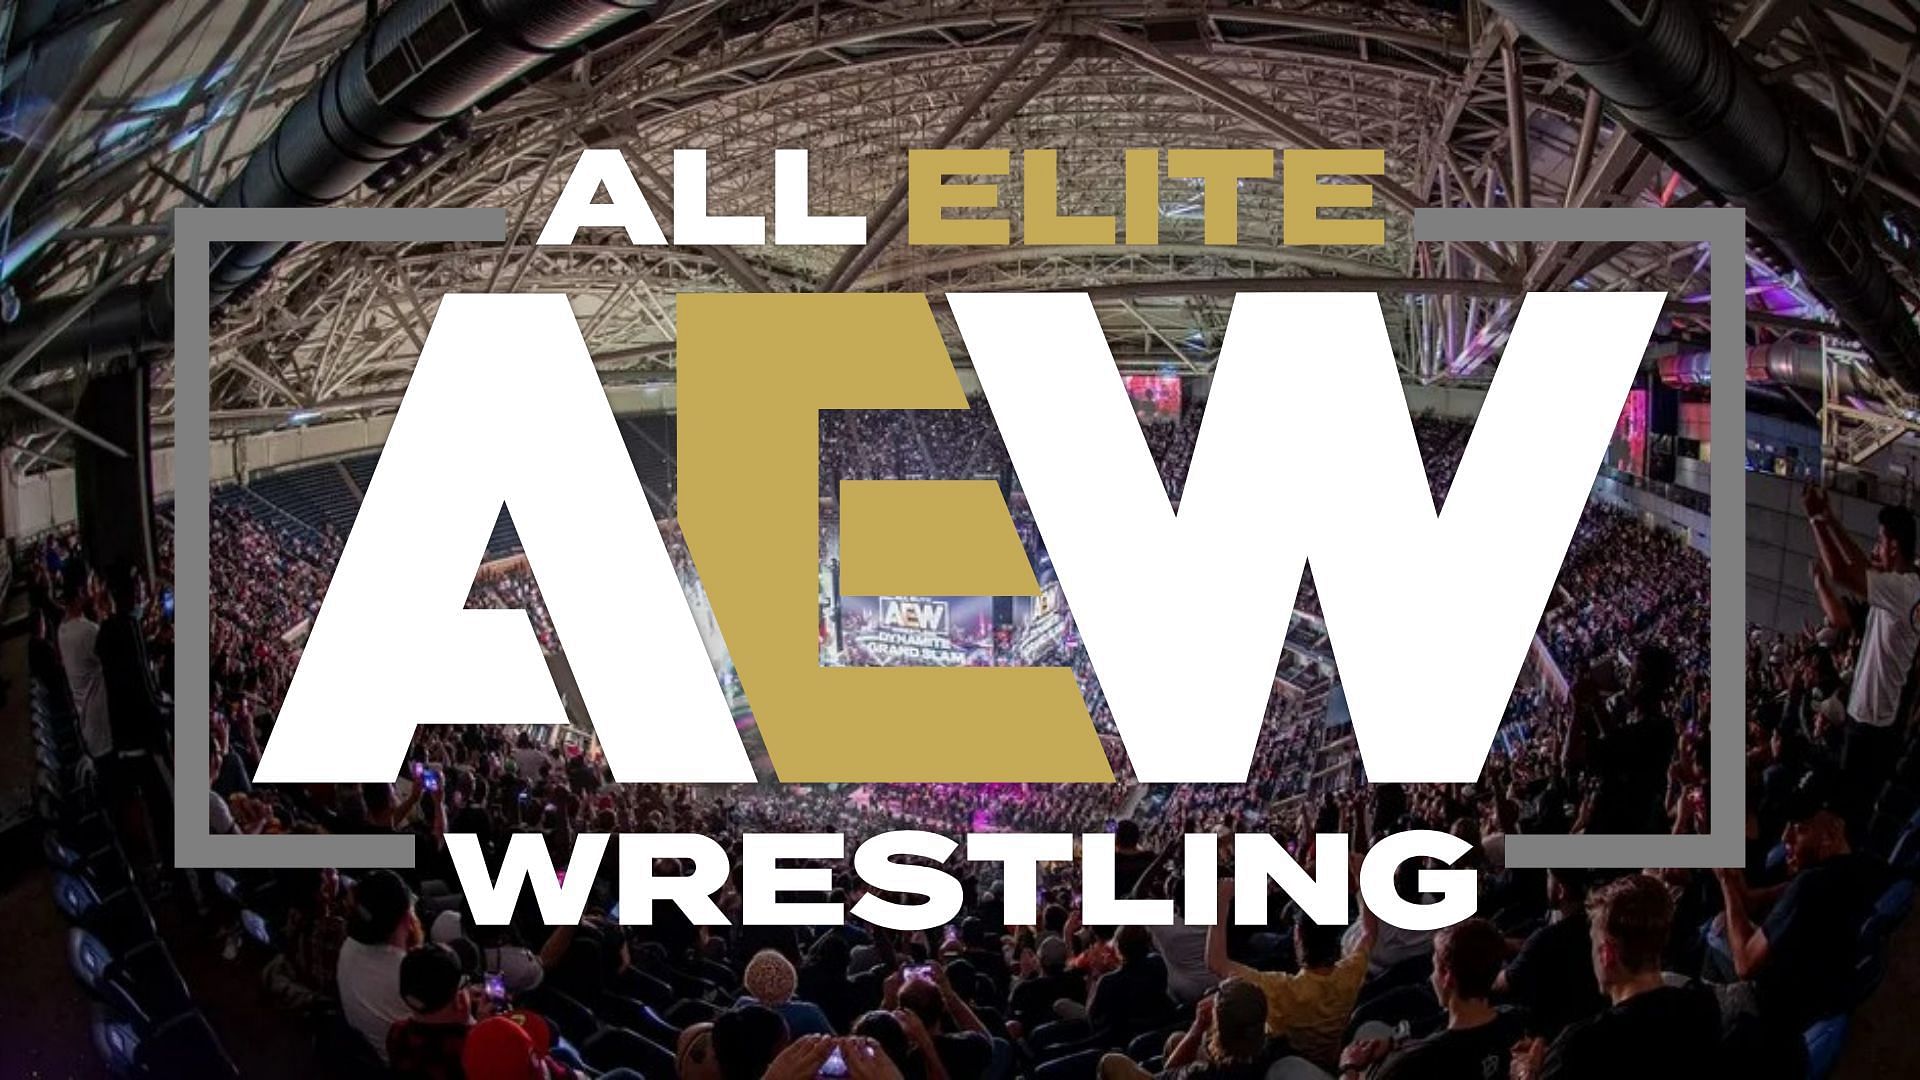 An absent AEW star has stated that they brought a lot of eyes to the company